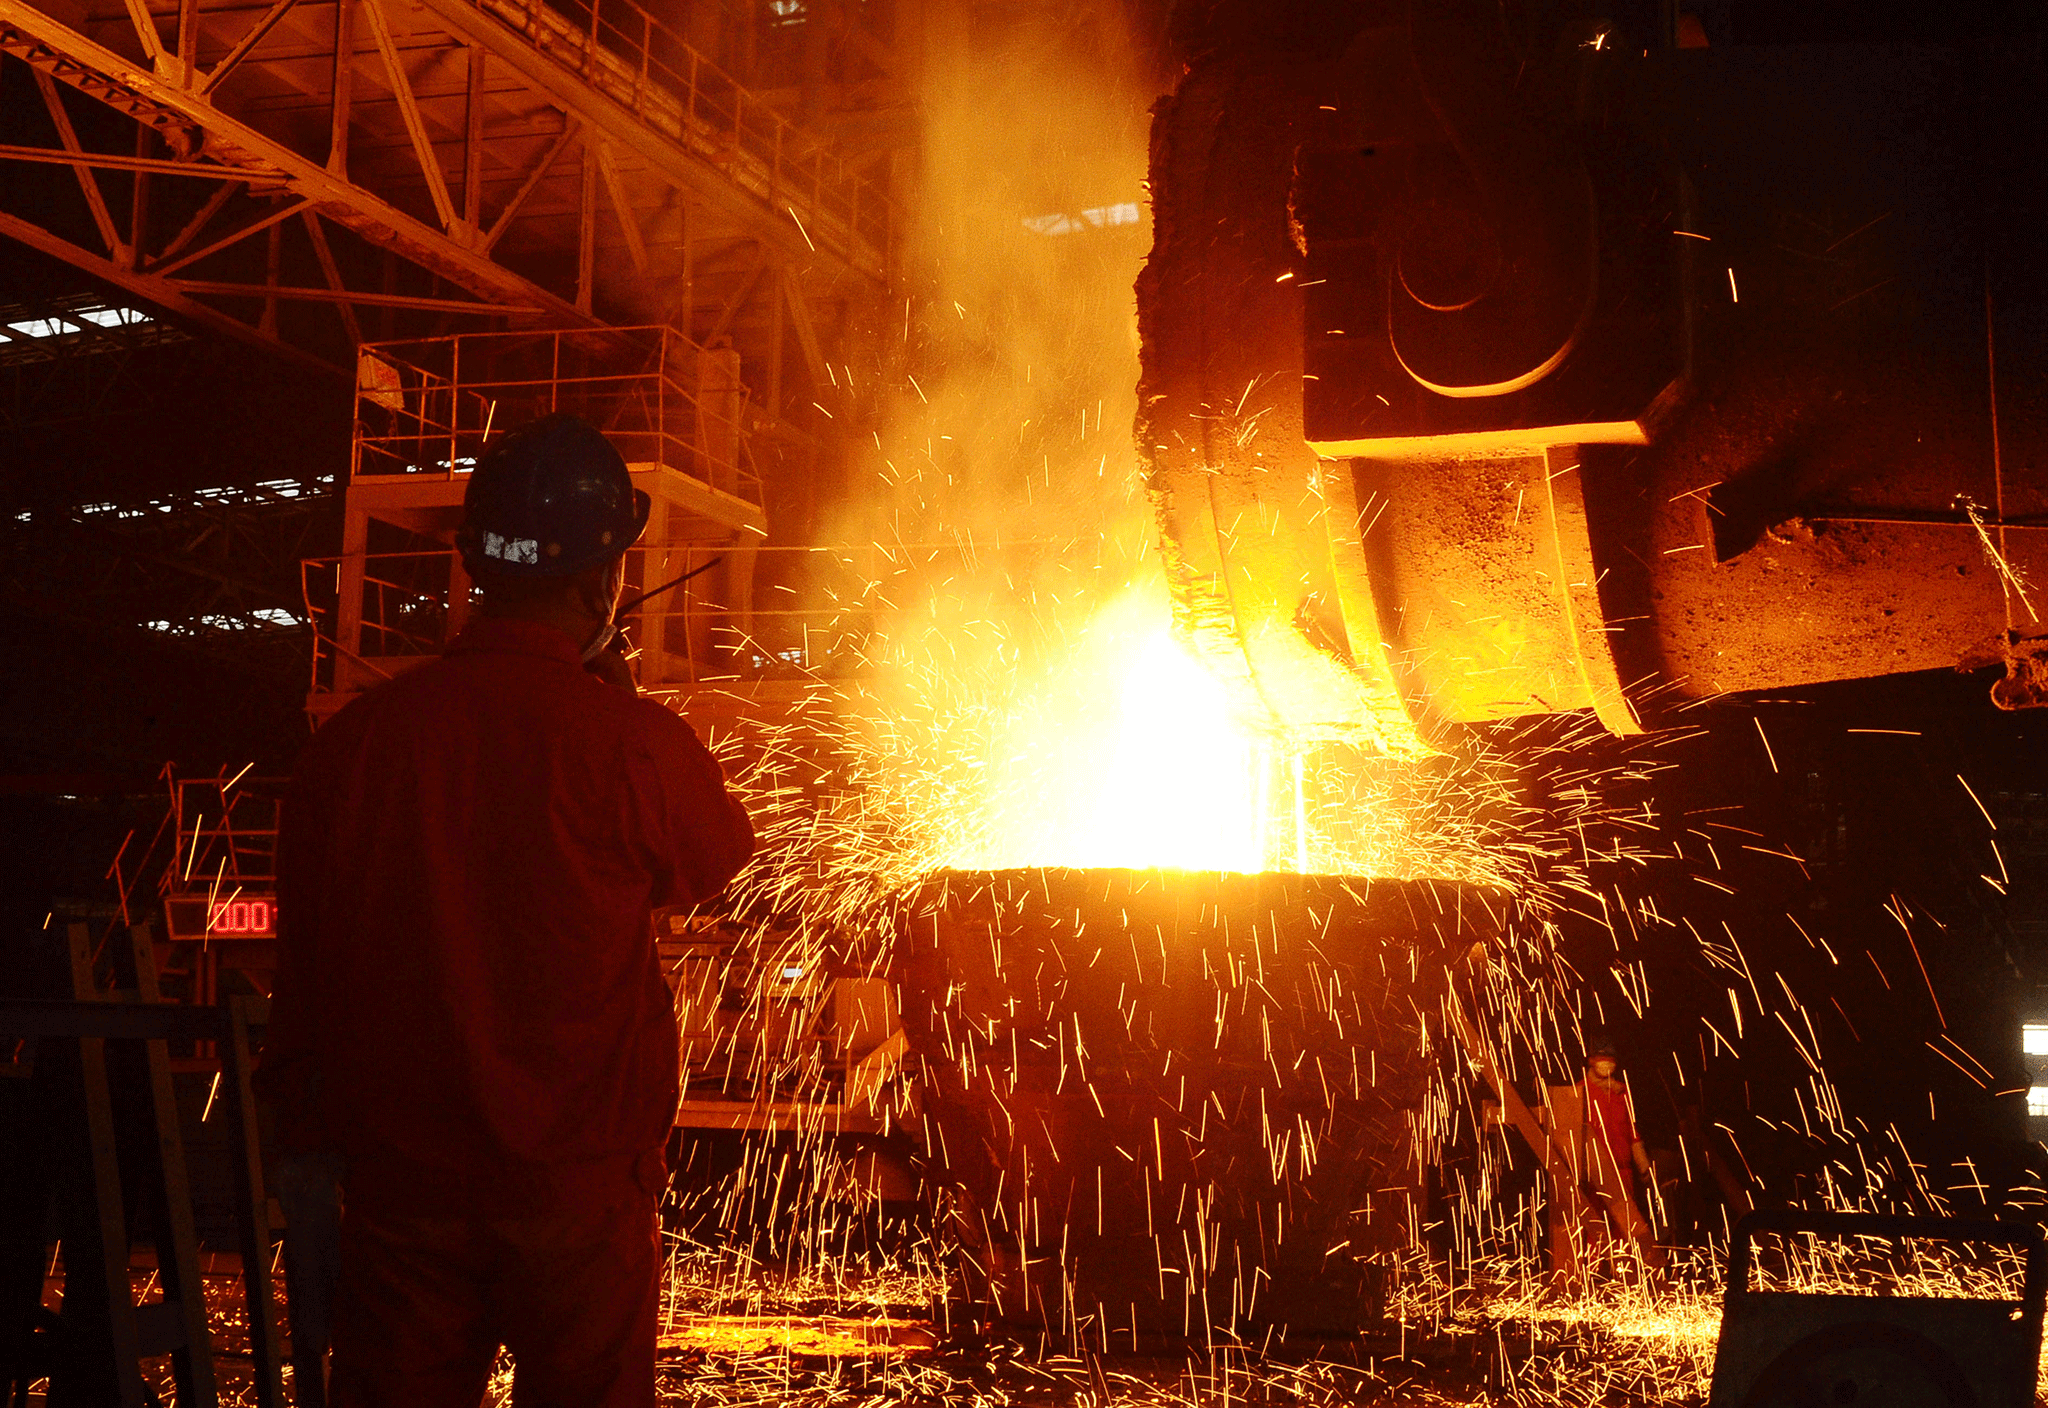 Chinese demand for steel products is likely to remain high over the coming months according to anlysts